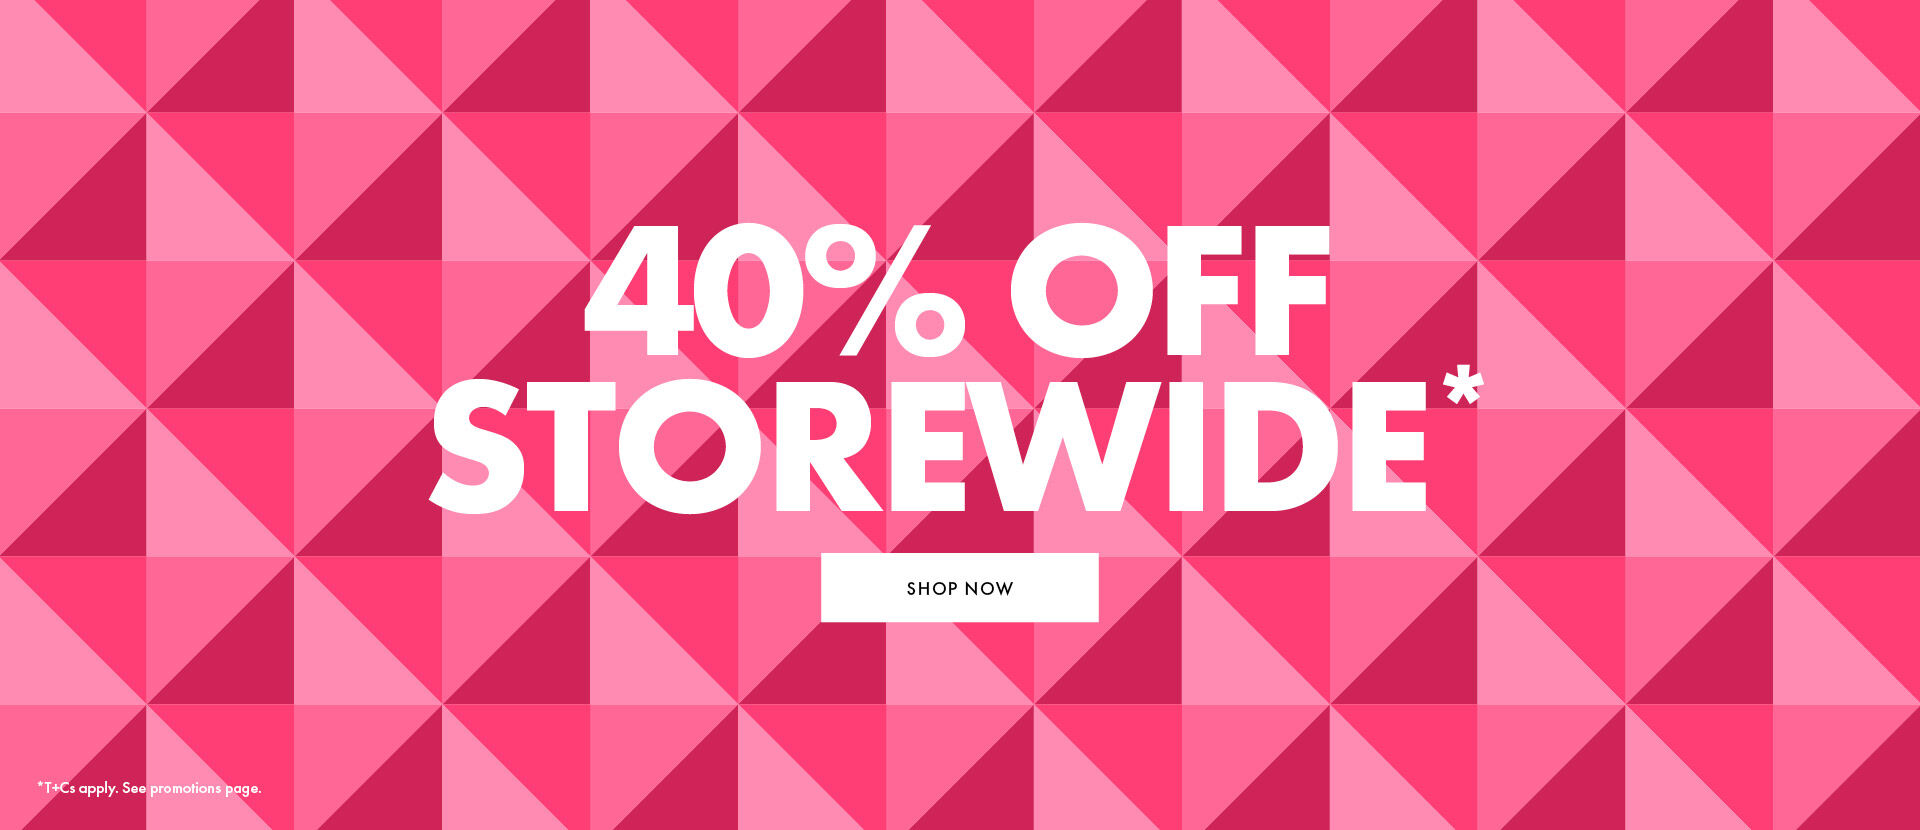 40% OFF storewide at Taking Shape